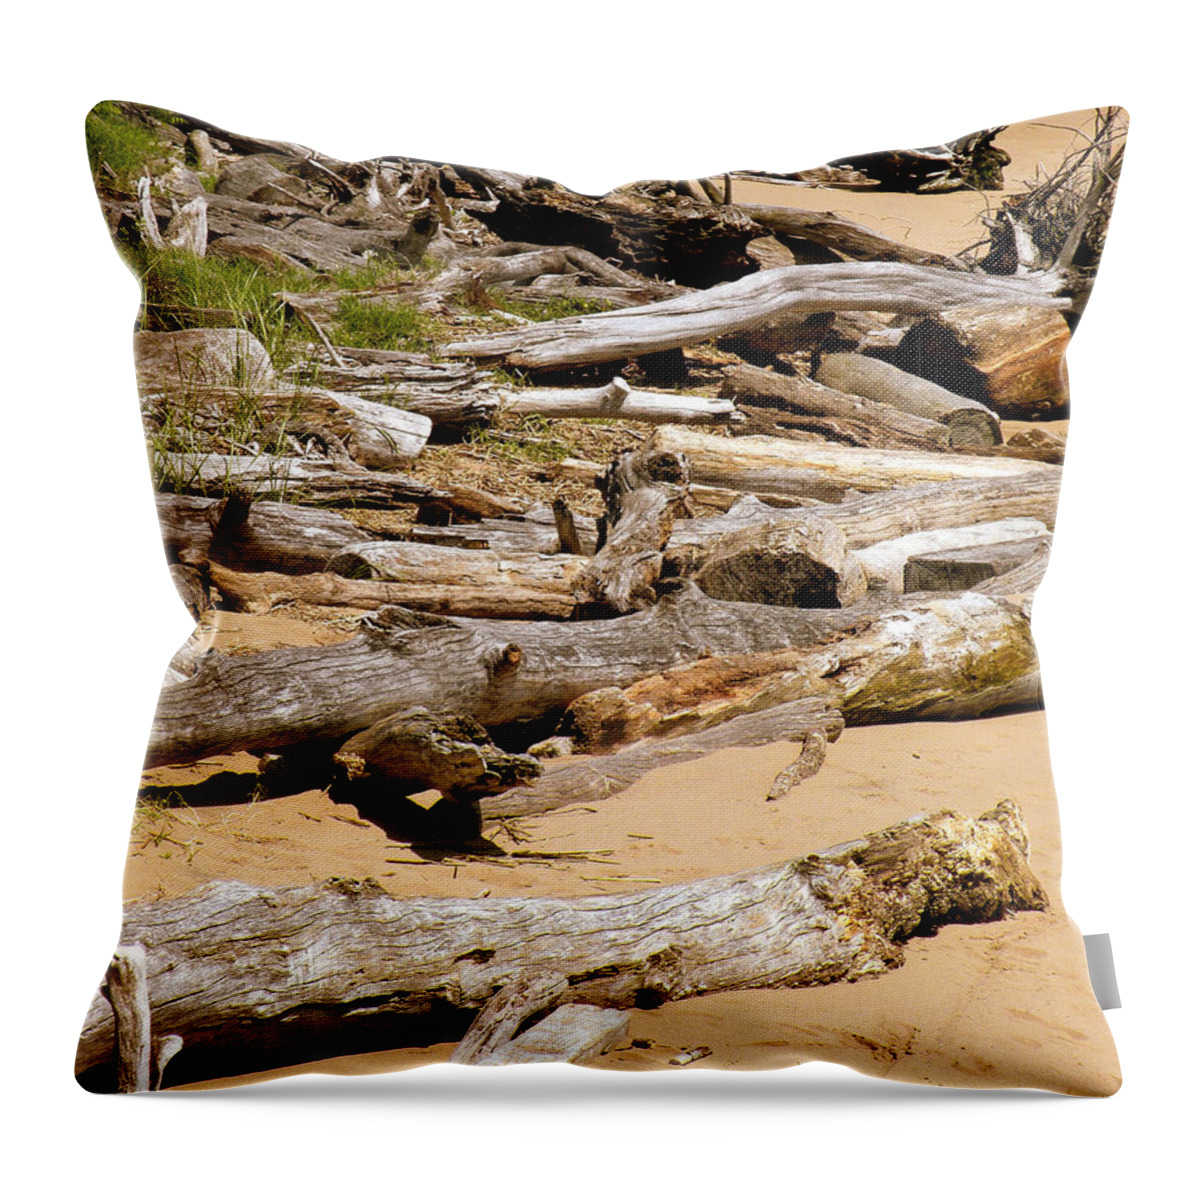 Driftwood Throw Pillow featuring the photograph Lonely Driftwood by Trish Tritz